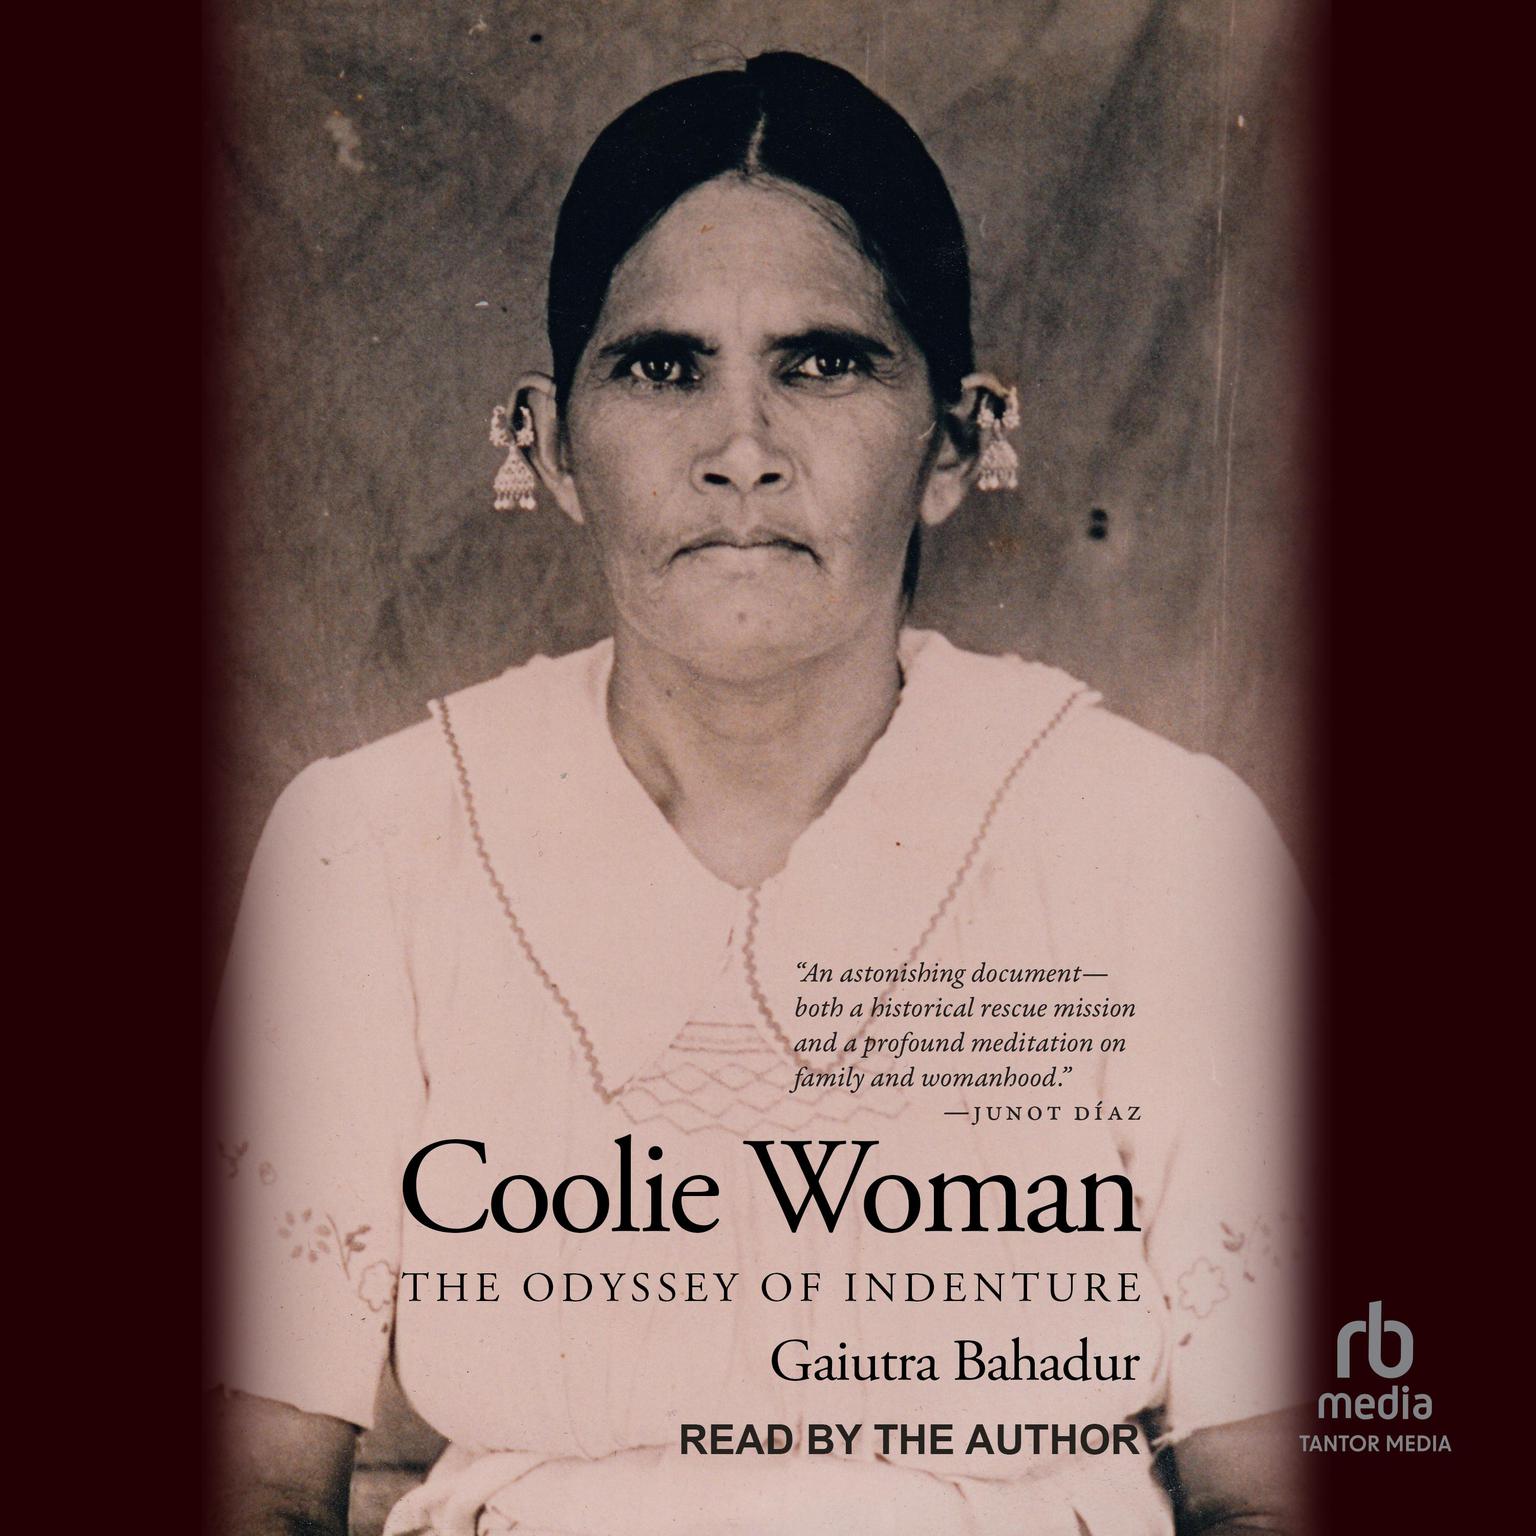 Coolie Woman: The Odyssey of Indenture Audiobook, by Gaiutra Bahadur